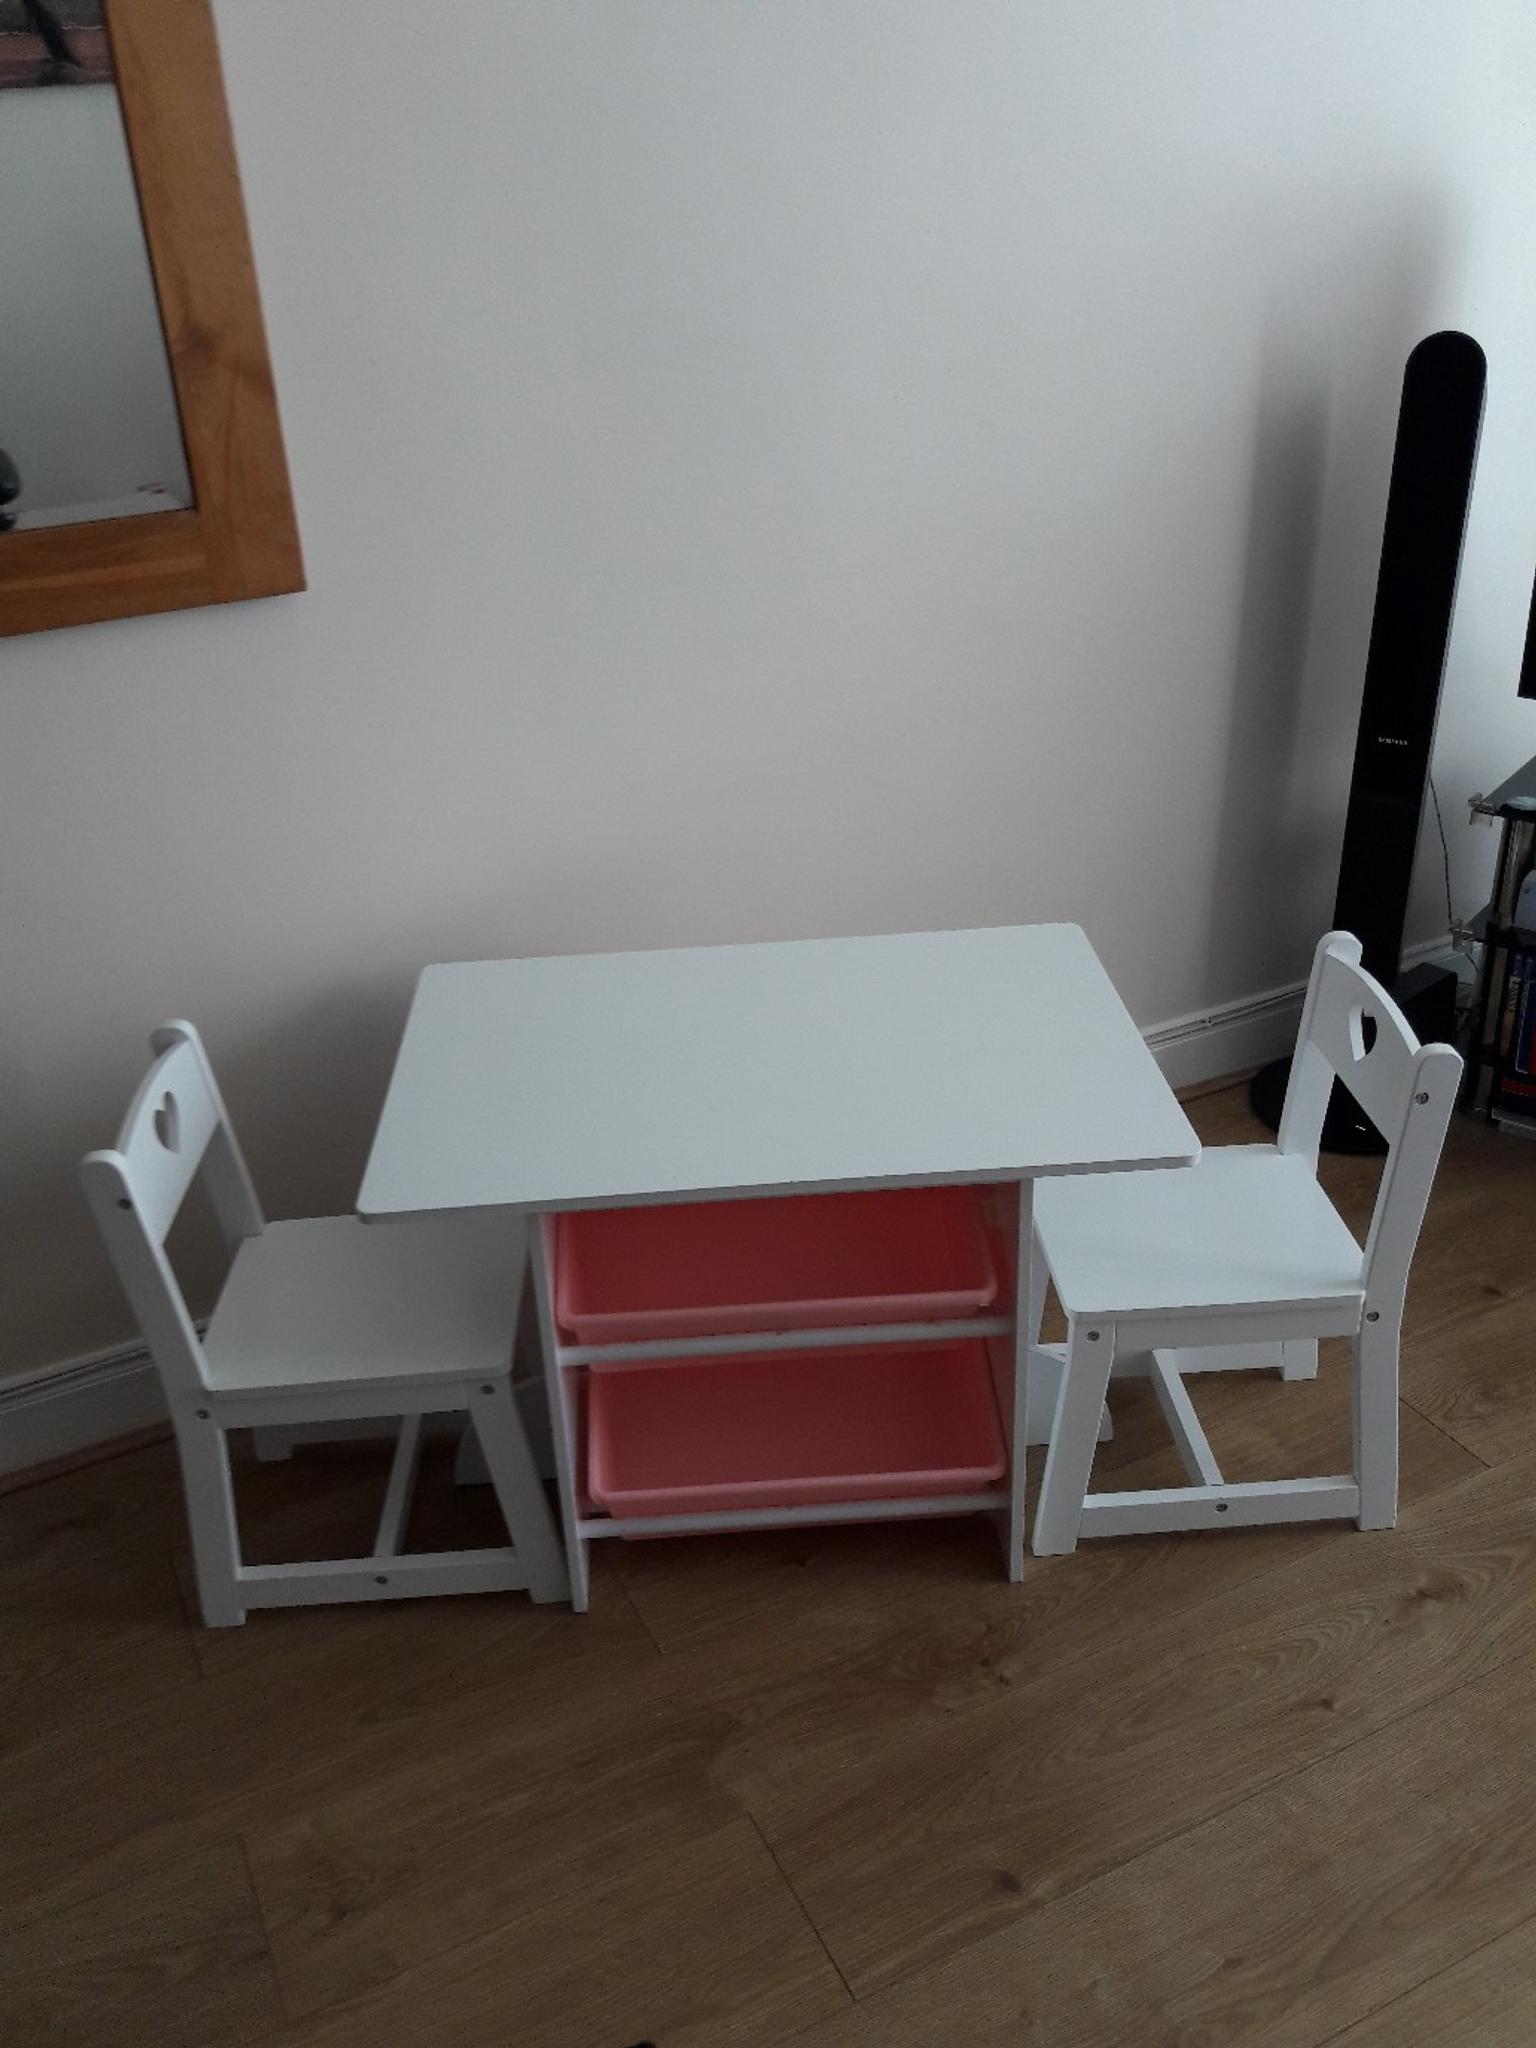 argos mia table and chairs